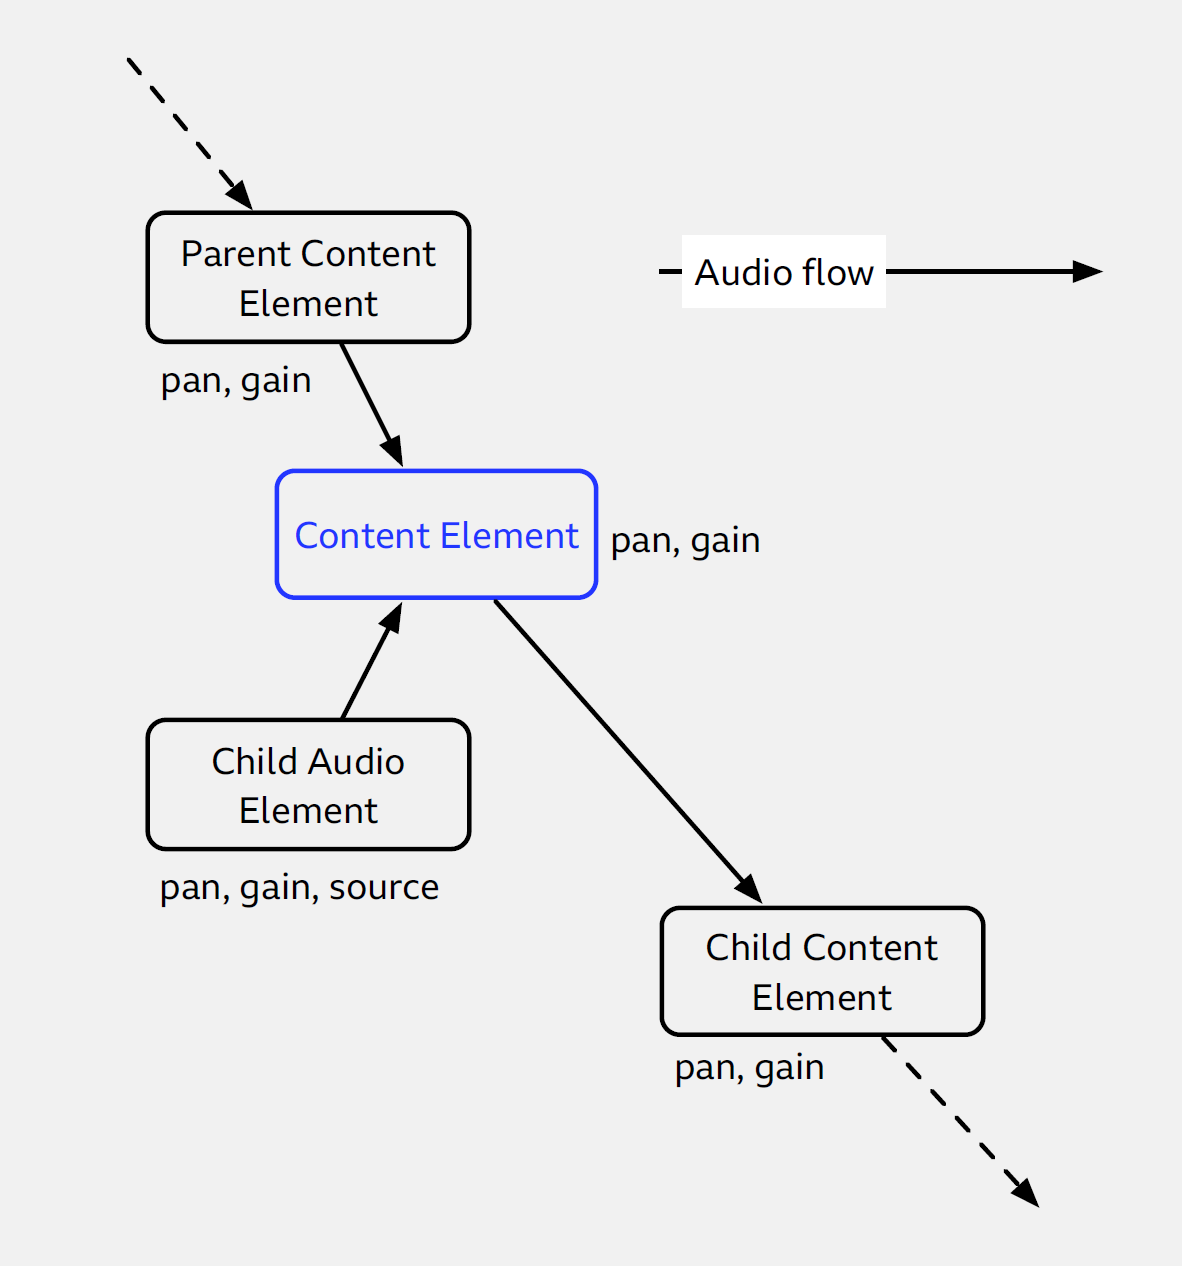 An image illustrating the effect of pan and gain on audio in a WEBAUDIO process